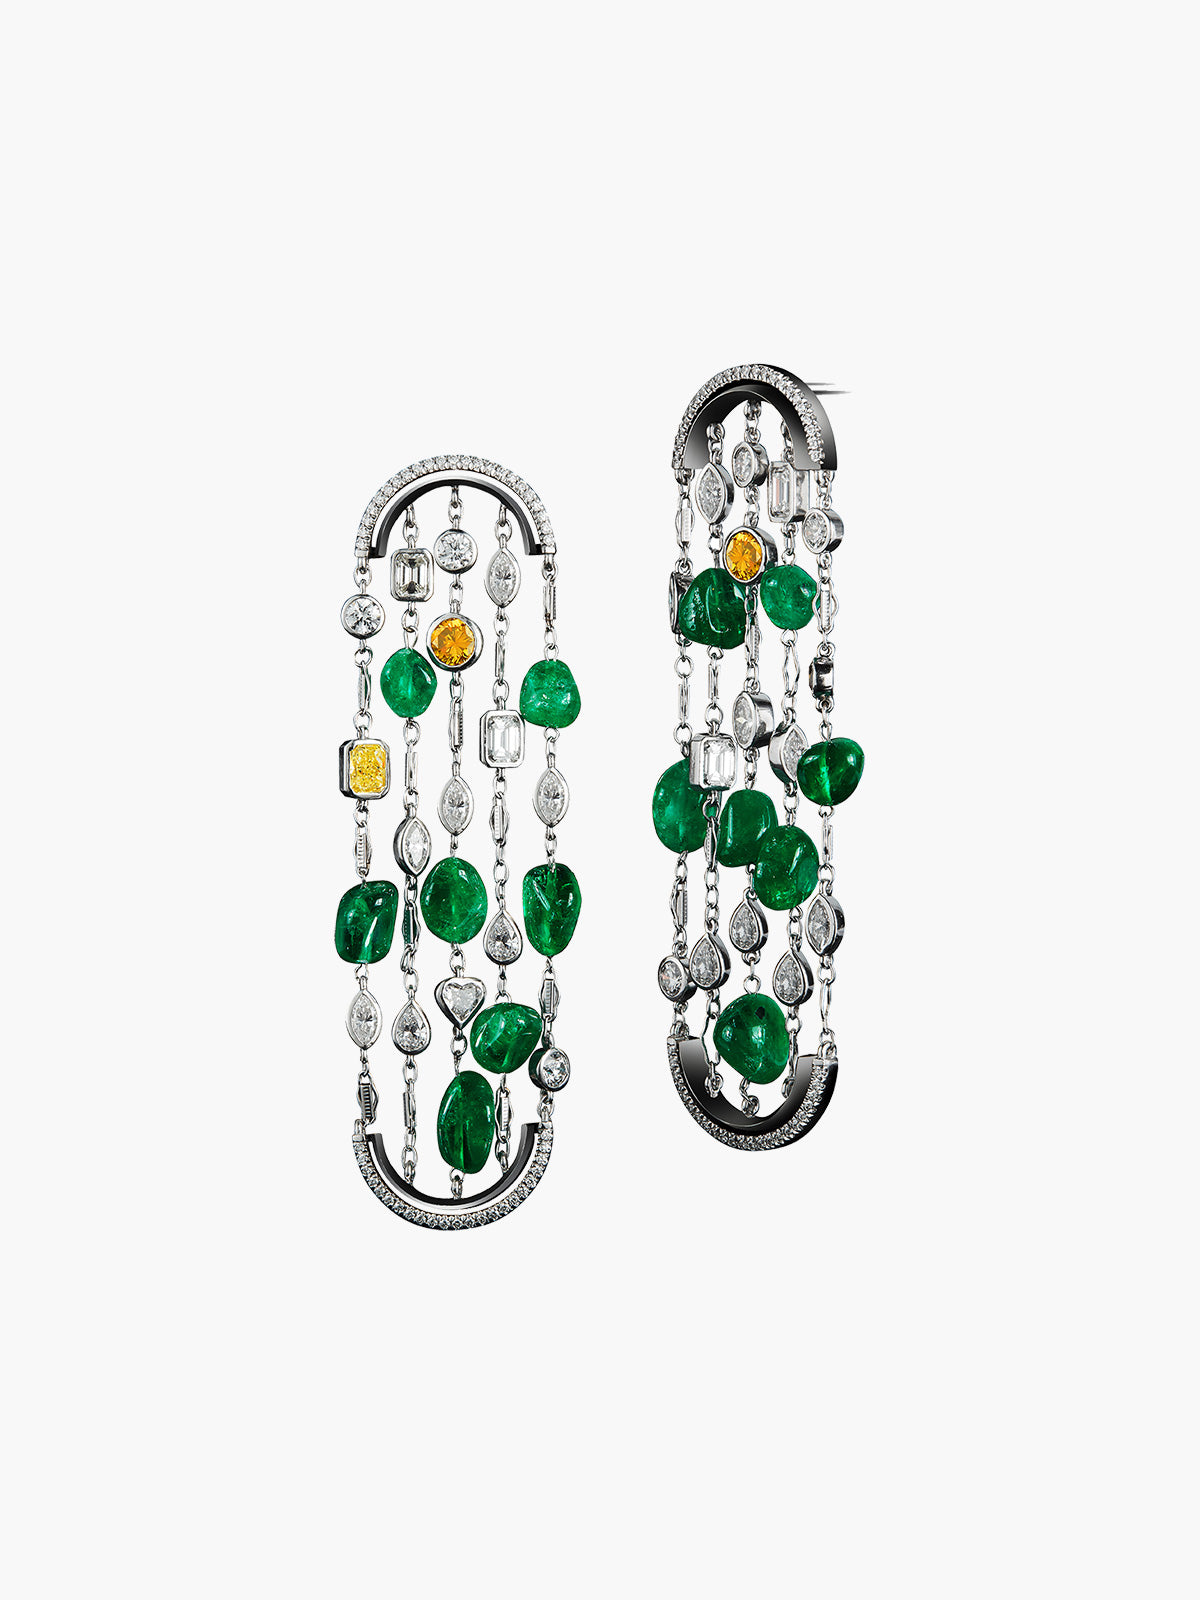 Arched Sautoir Tumble Bead Earrings Arched Sautoir Tumble Bead Earrings